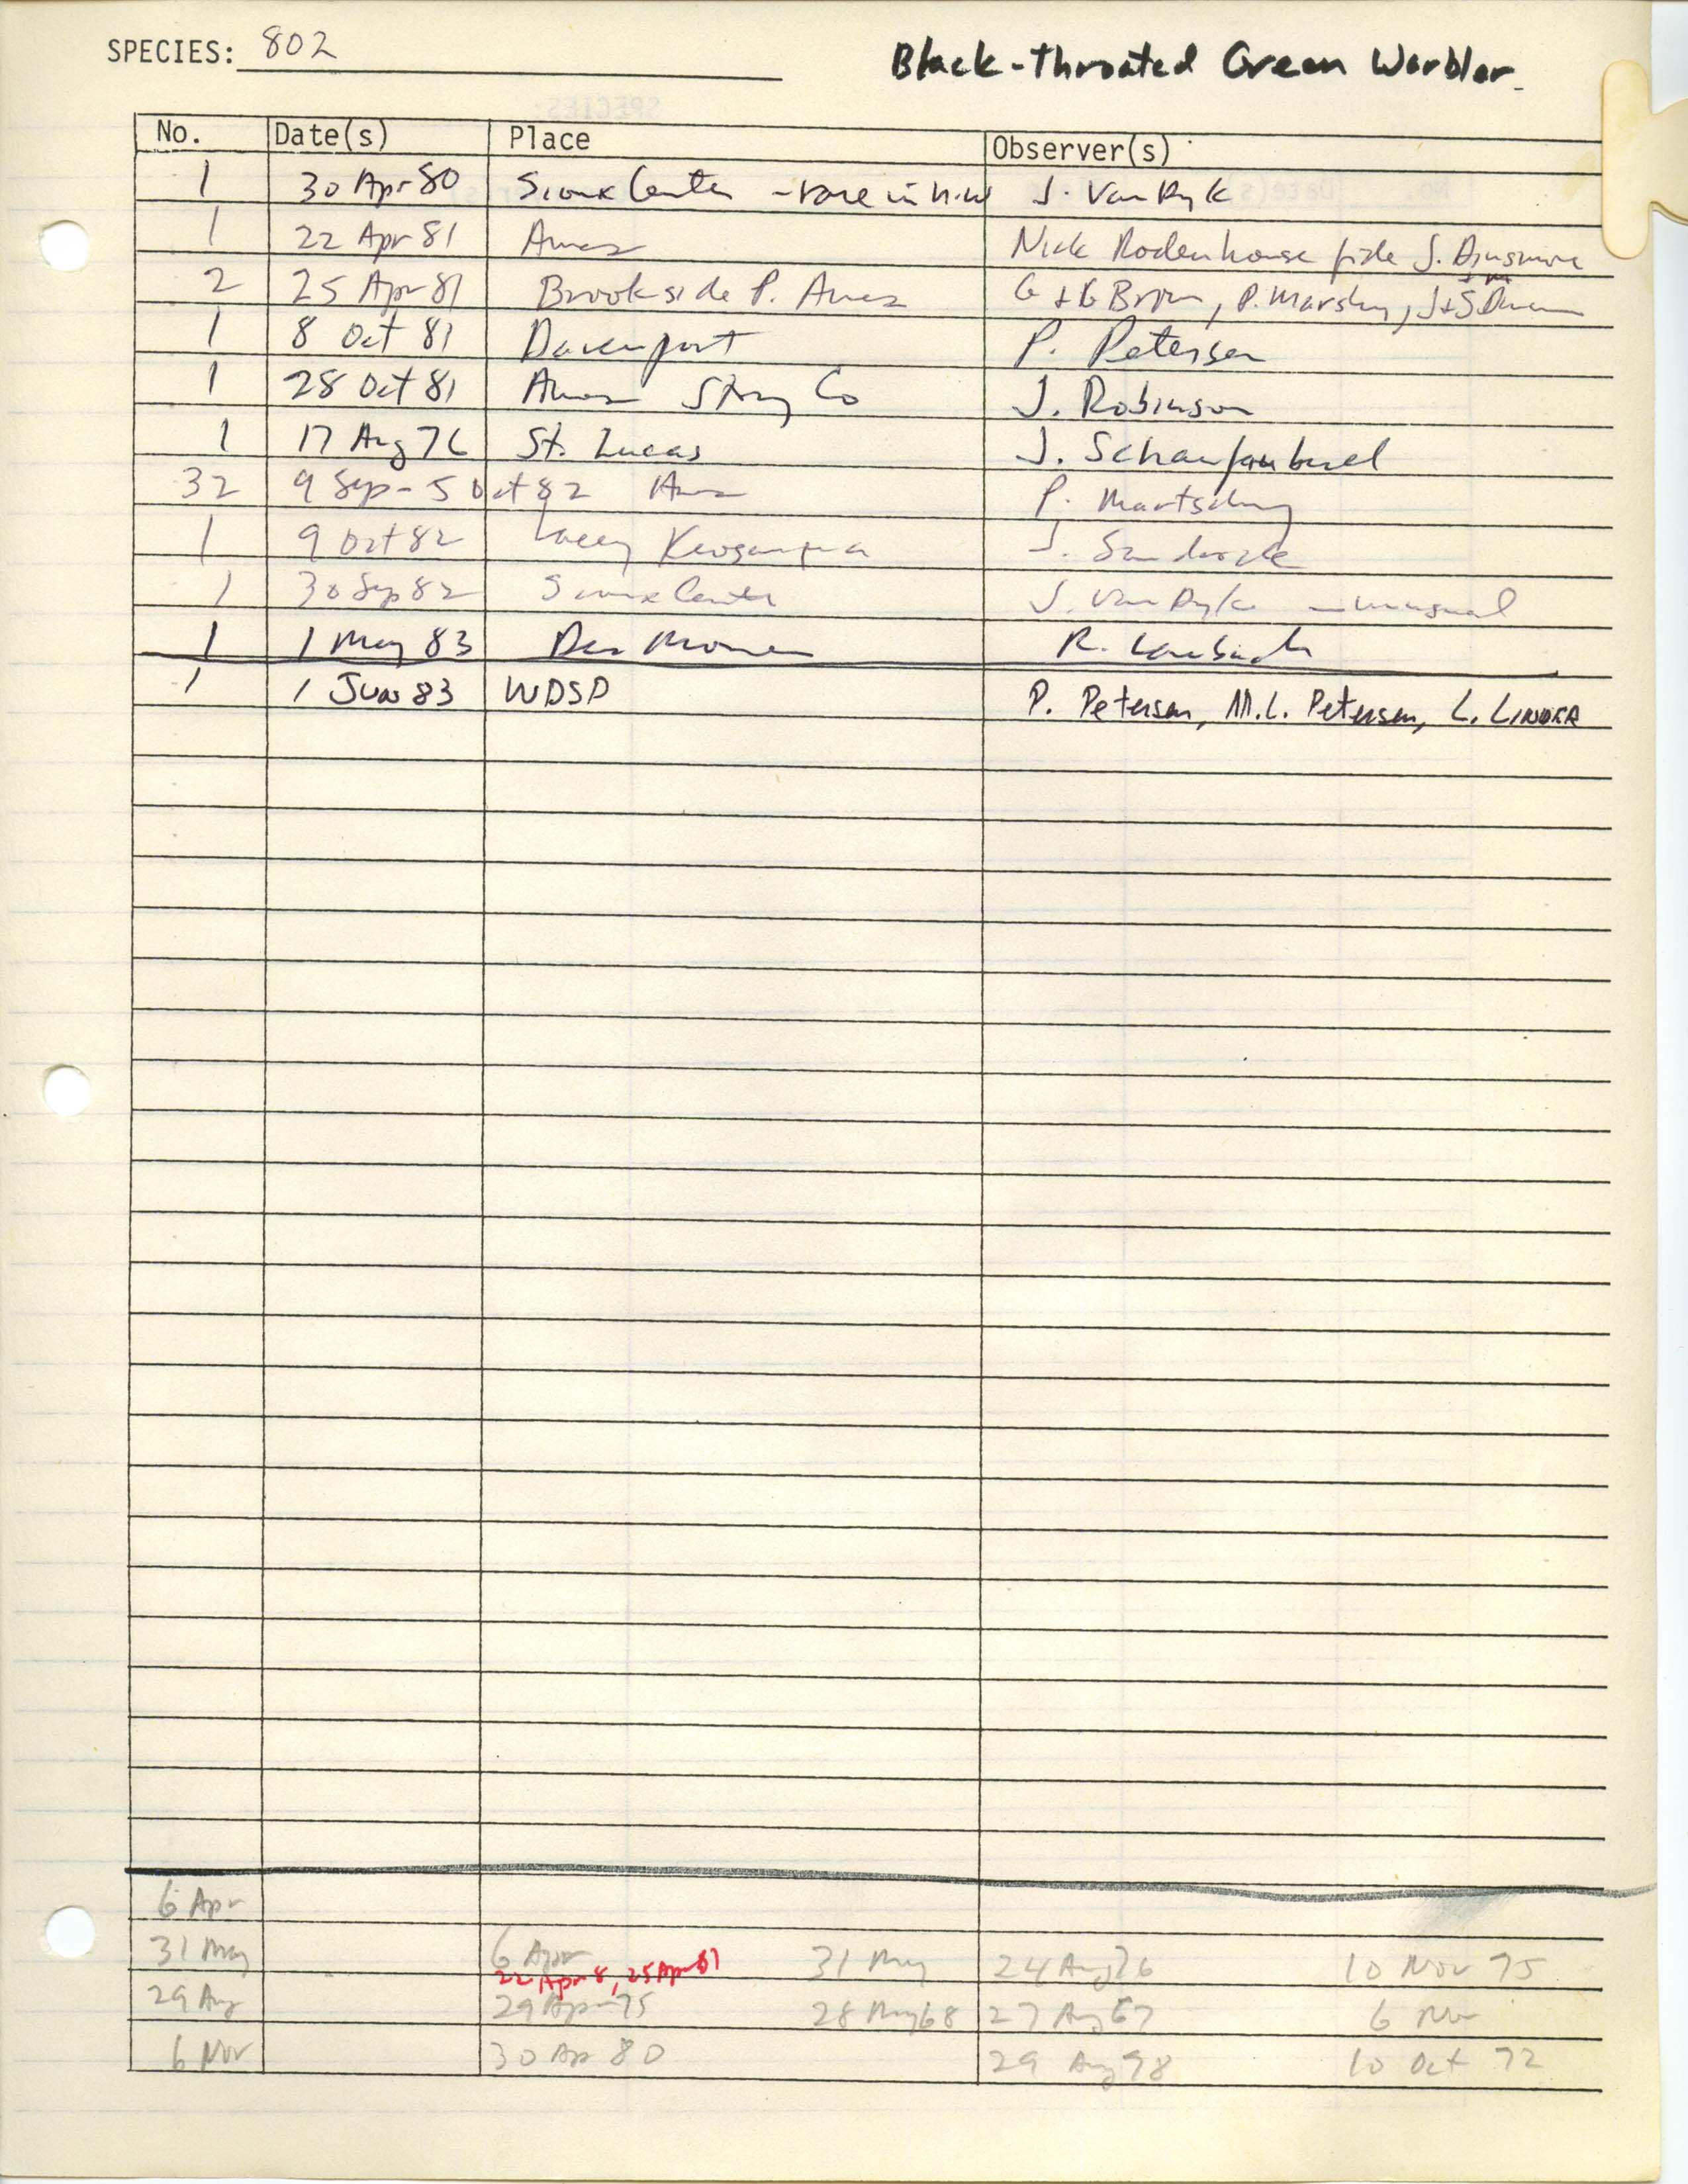 Iowa Ornithologists' Union, field report compiled data, Black-throated Green Warbler, 1980-1983